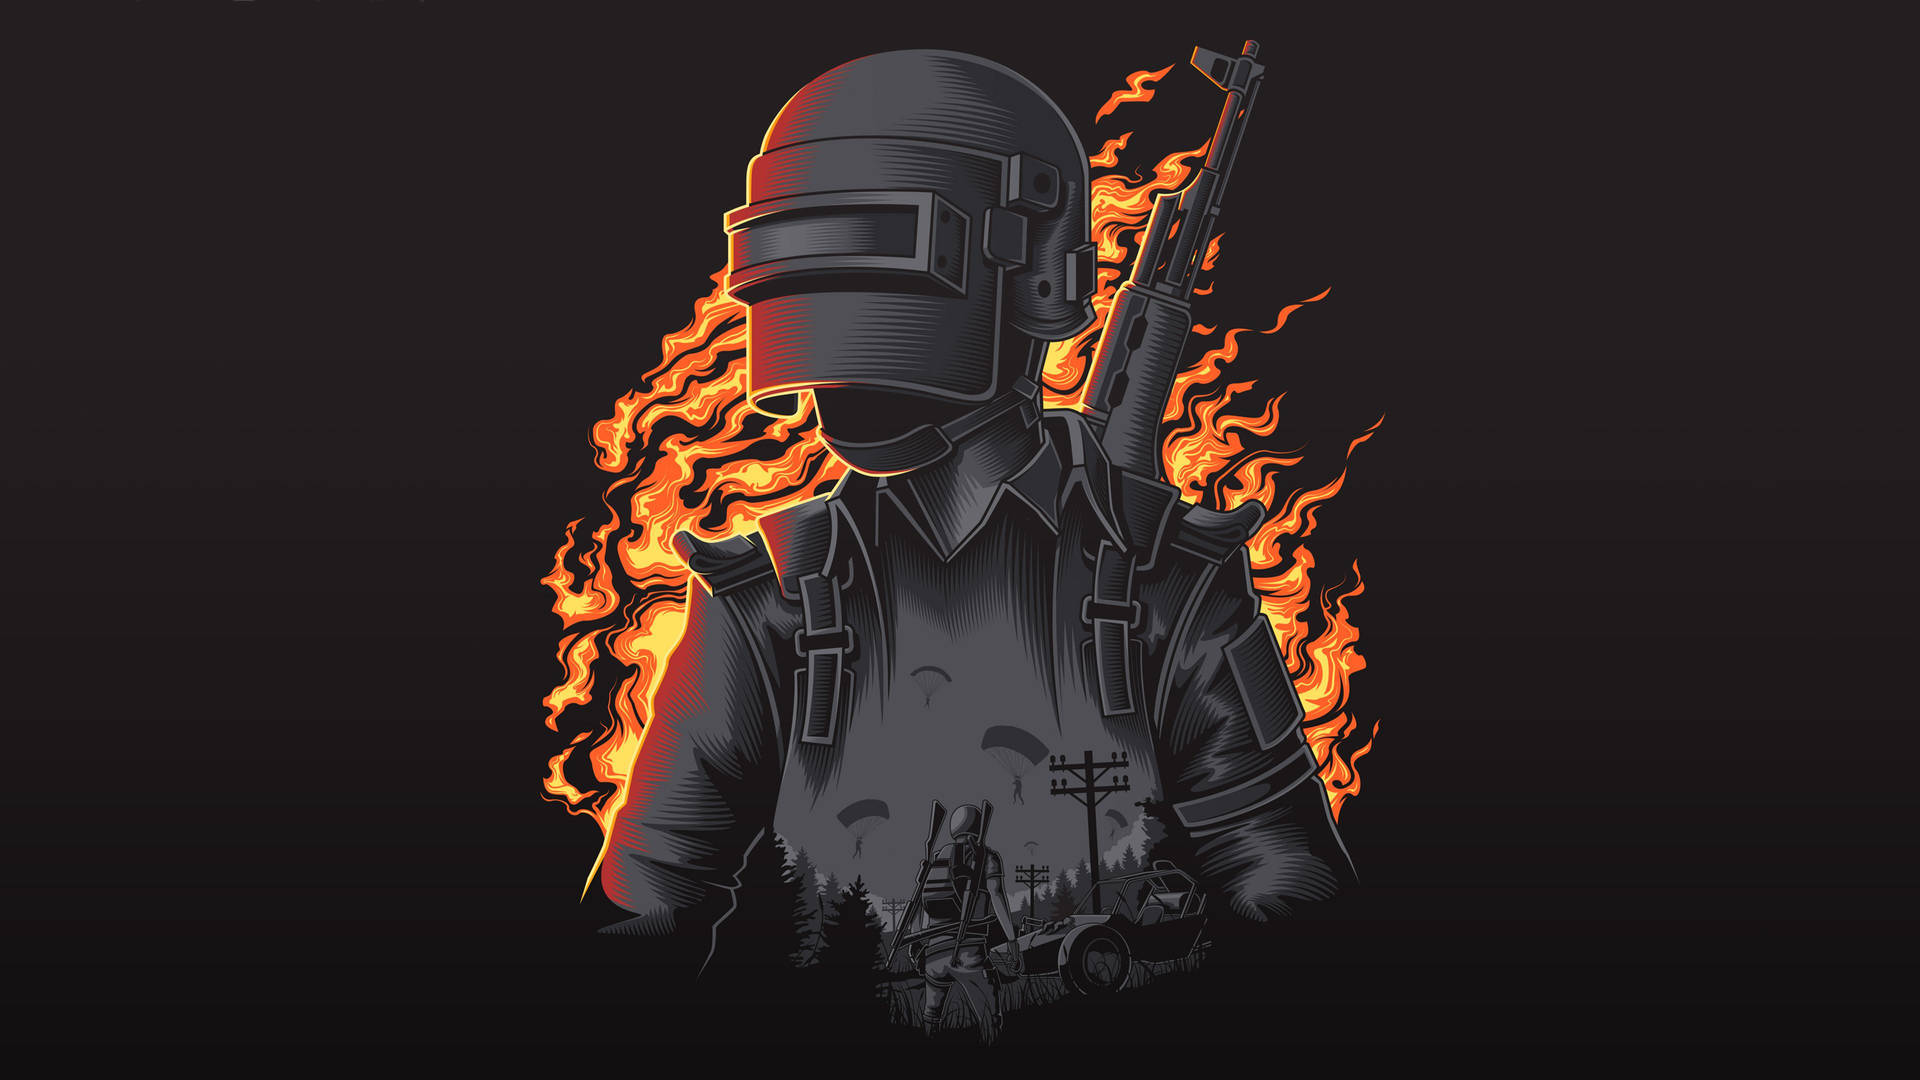 Free Pubg Lover Wallpaper Downloads, [100+] Pubg Lover Wallpapers for FREE  